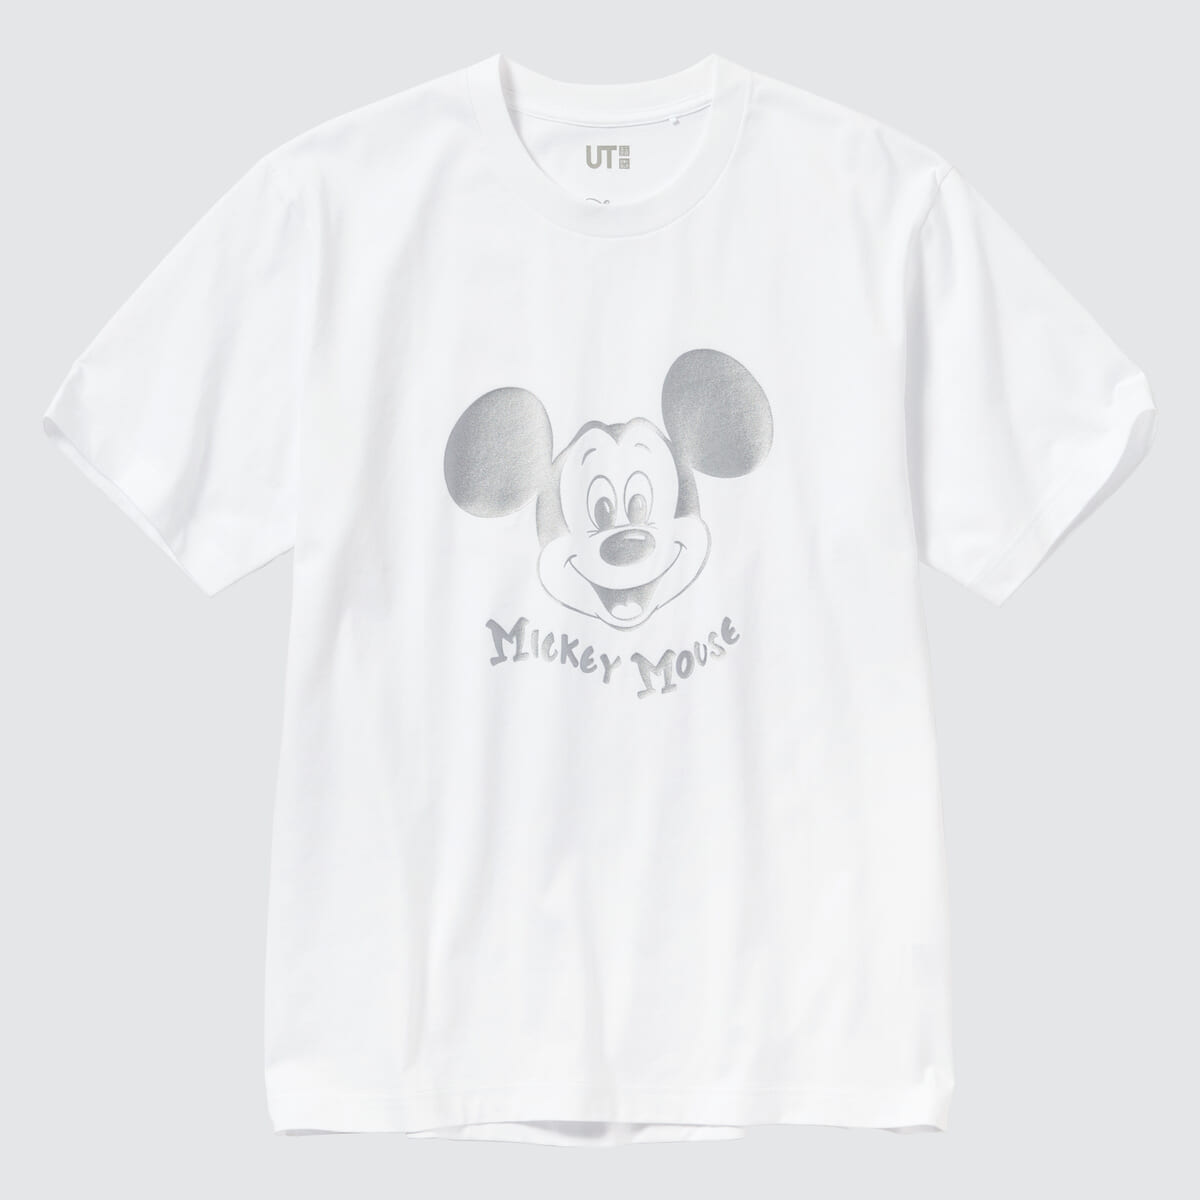 MICKEY MOUSE CLUB Tシャツ